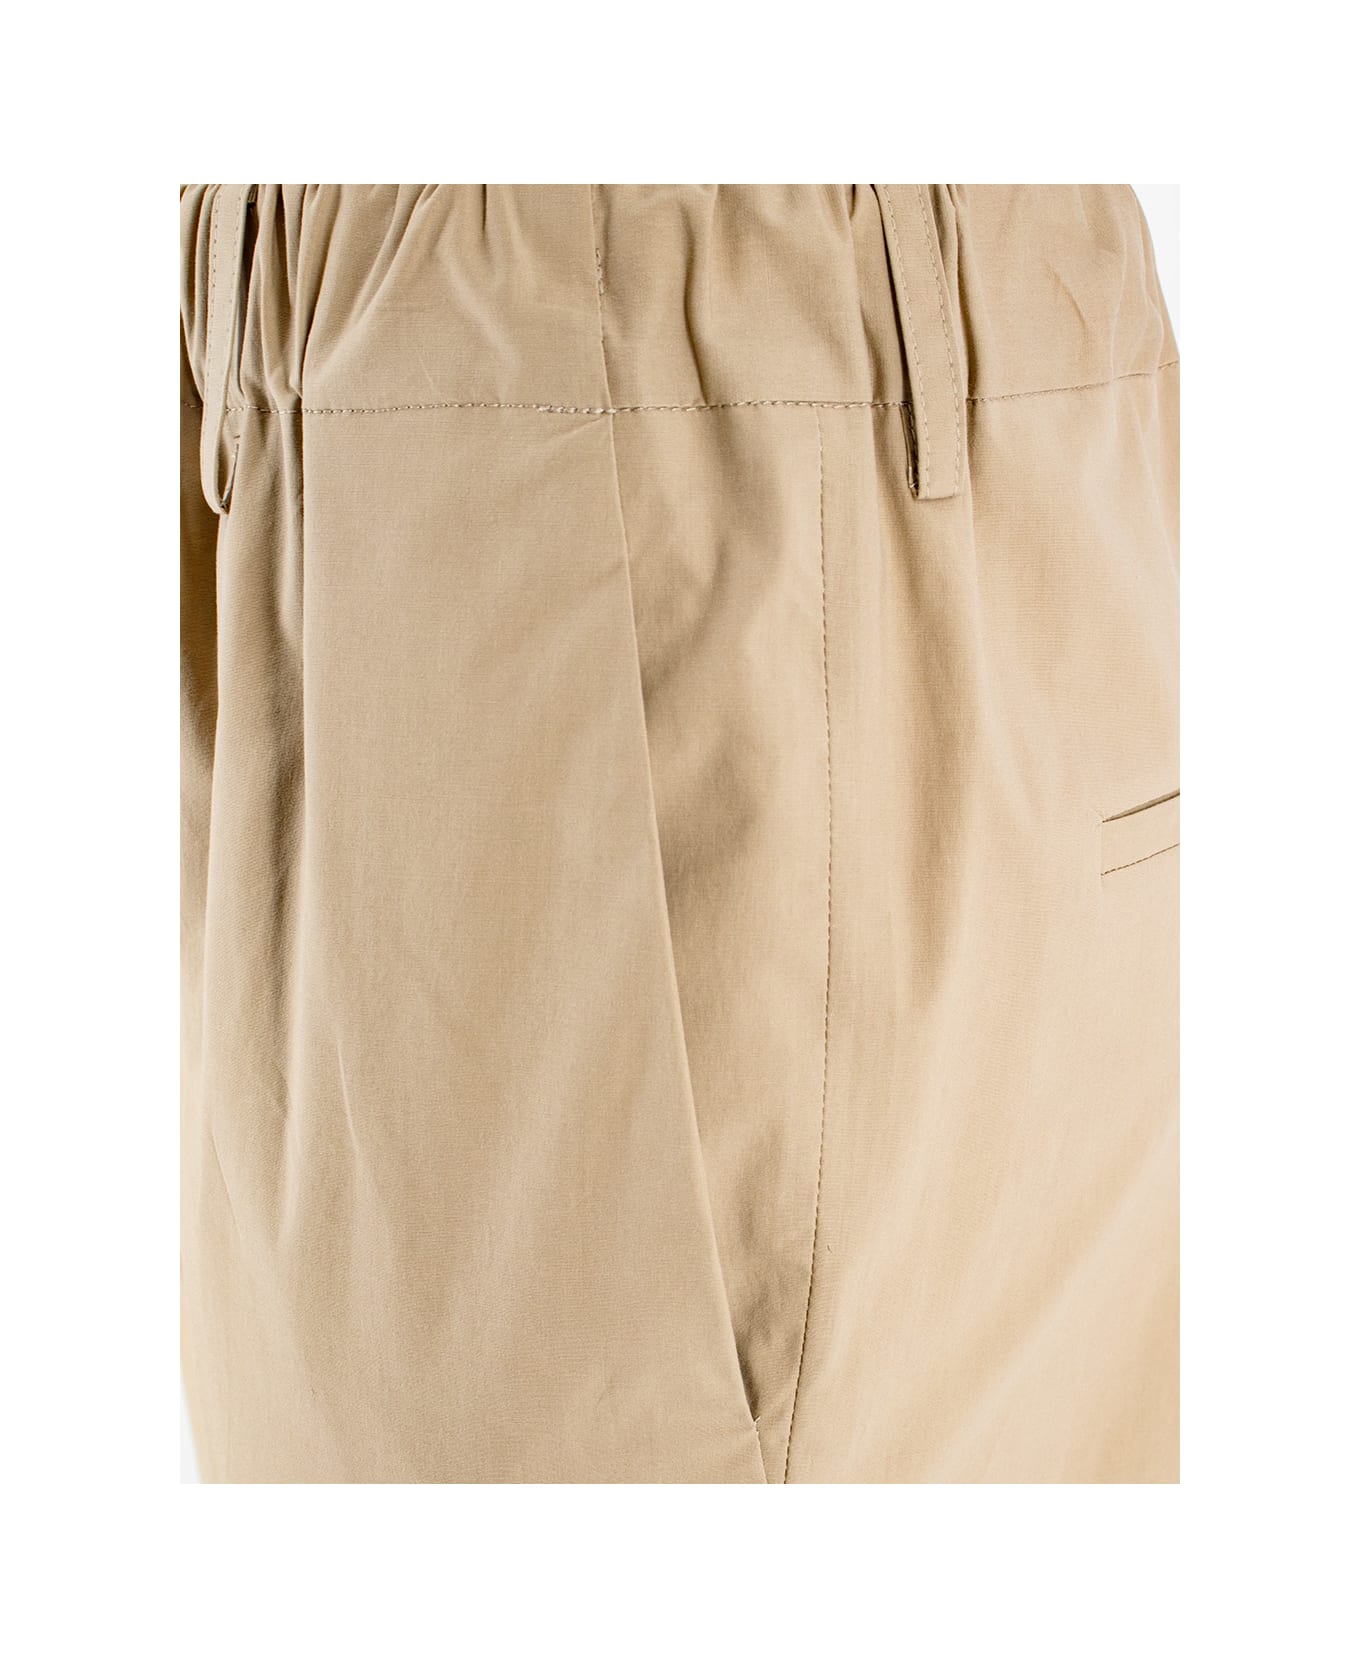 Antonelli Trousers - BROWN ボトムス